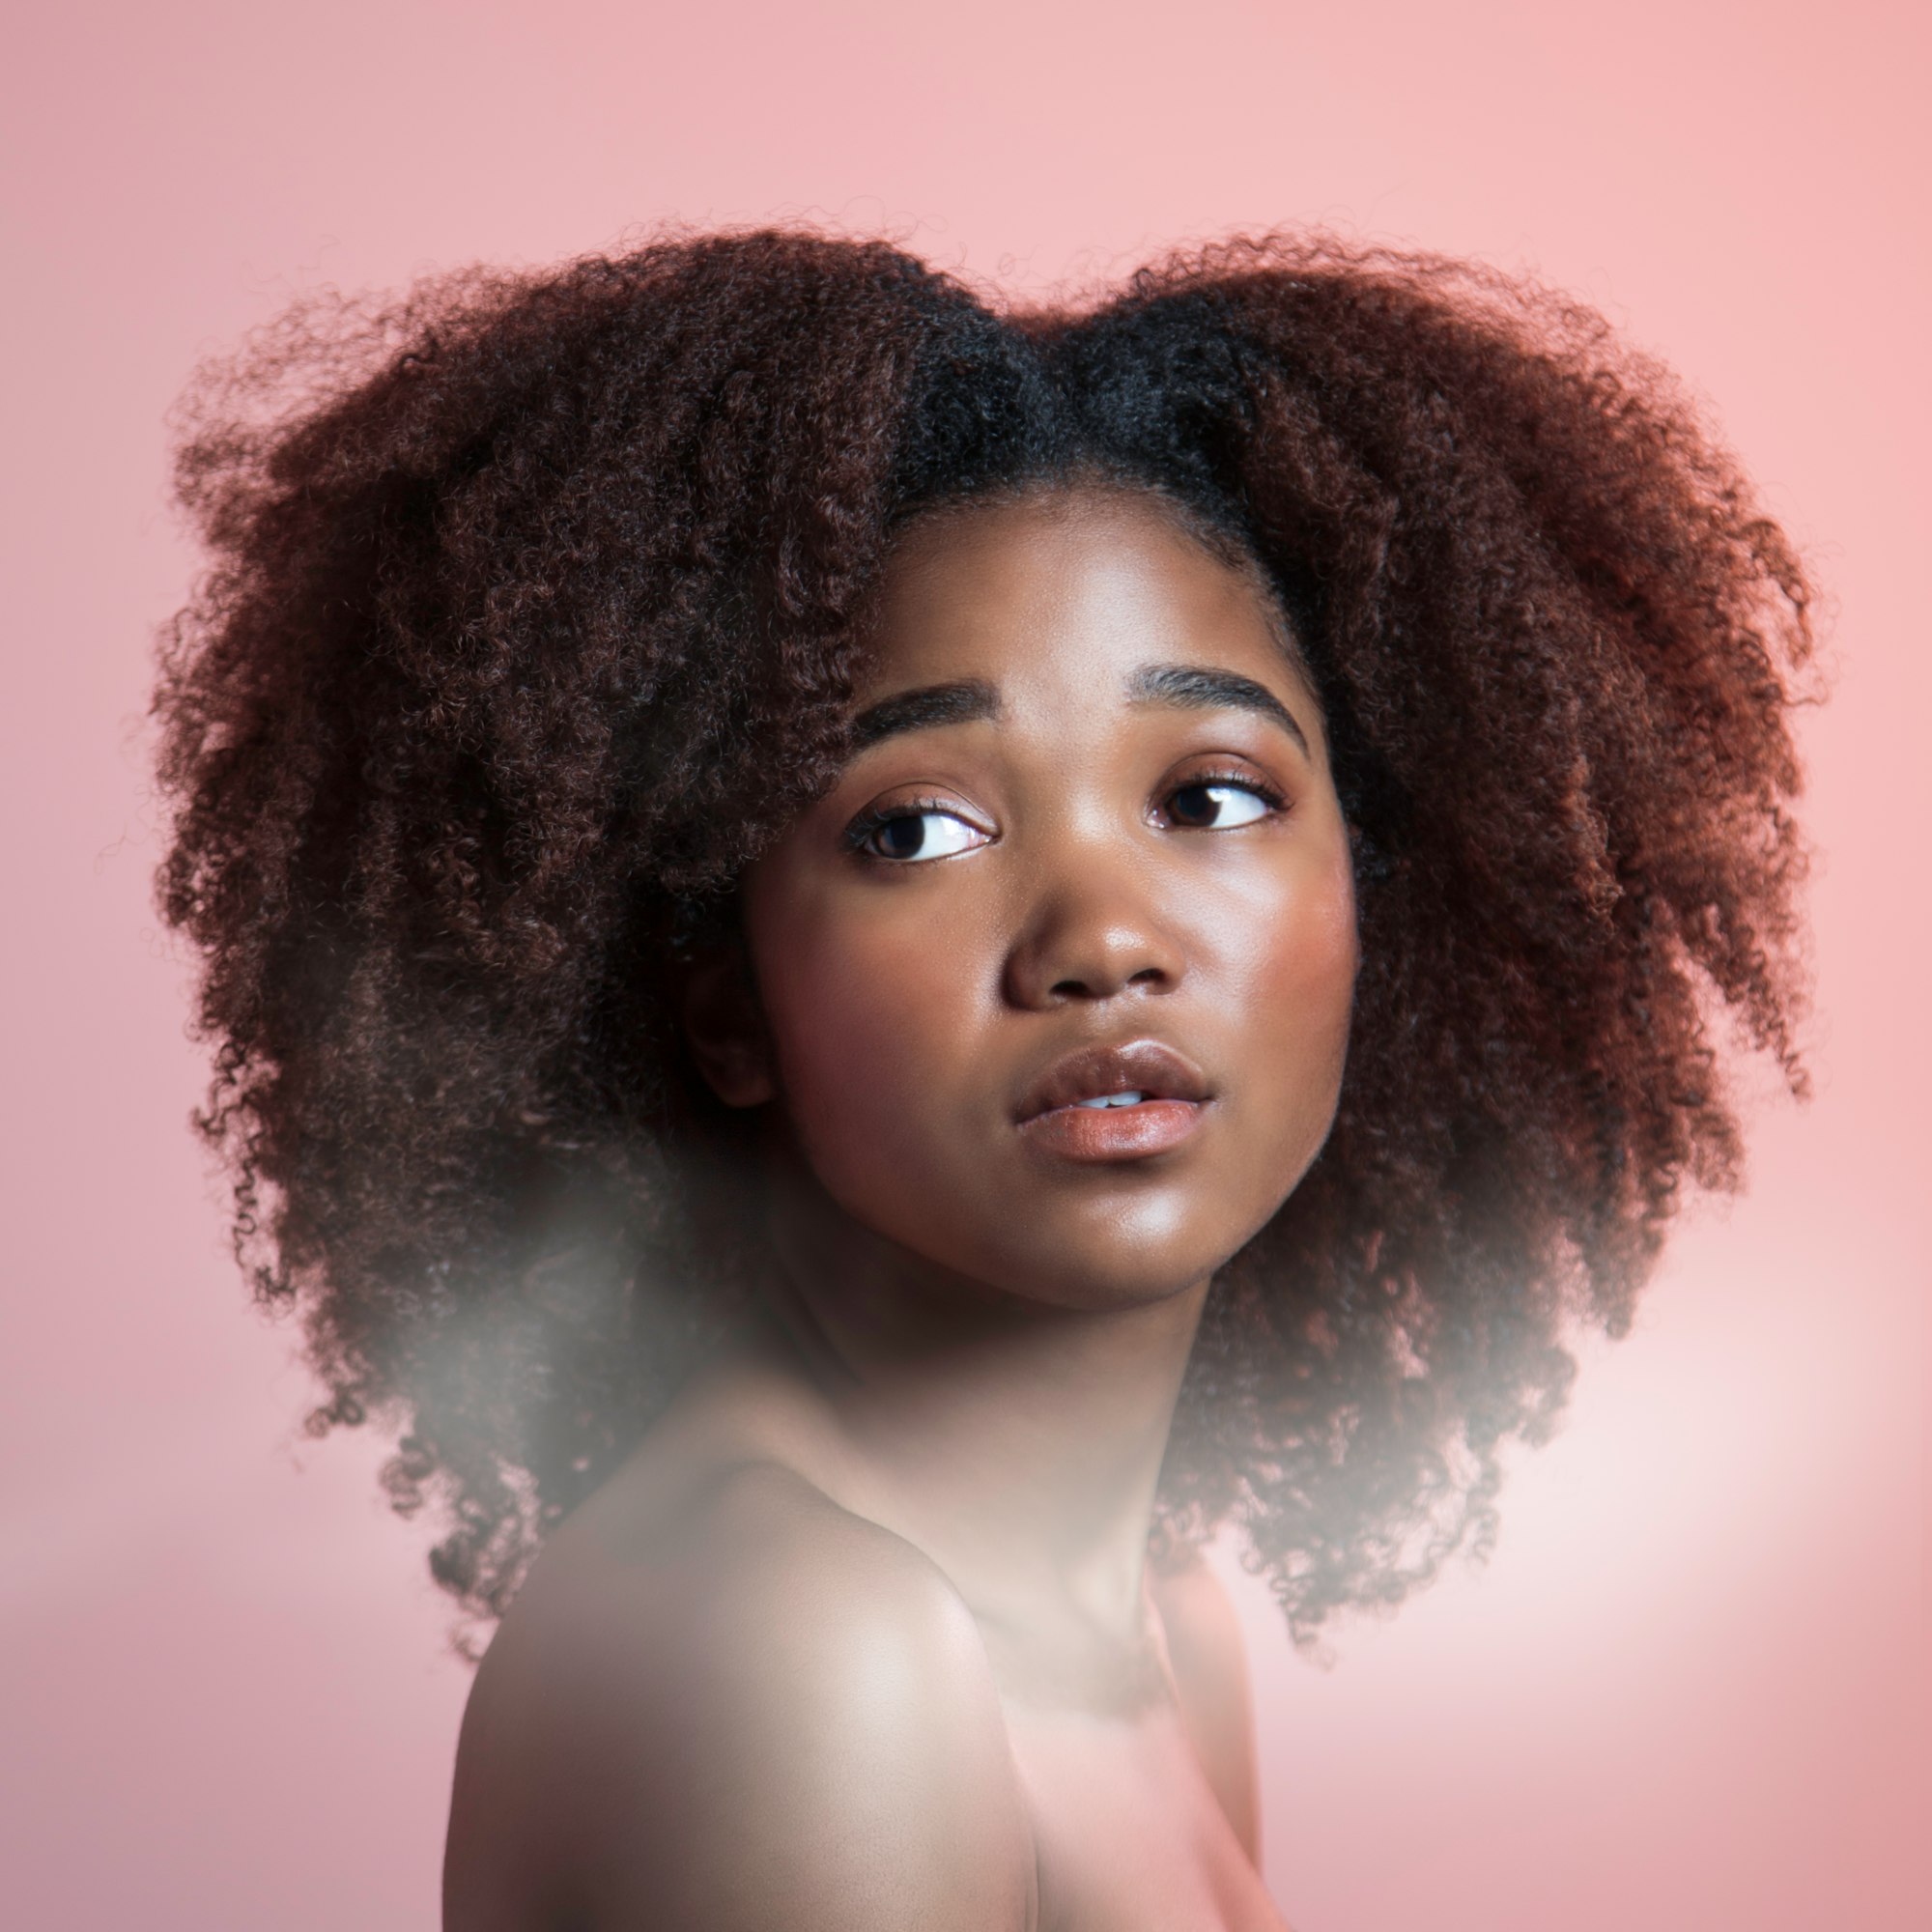 Black Girl Ventures Foundation, Rare Beauty Brands, and retailer JC Penney name 7 finalists for Black and brown beauty pitch challenge